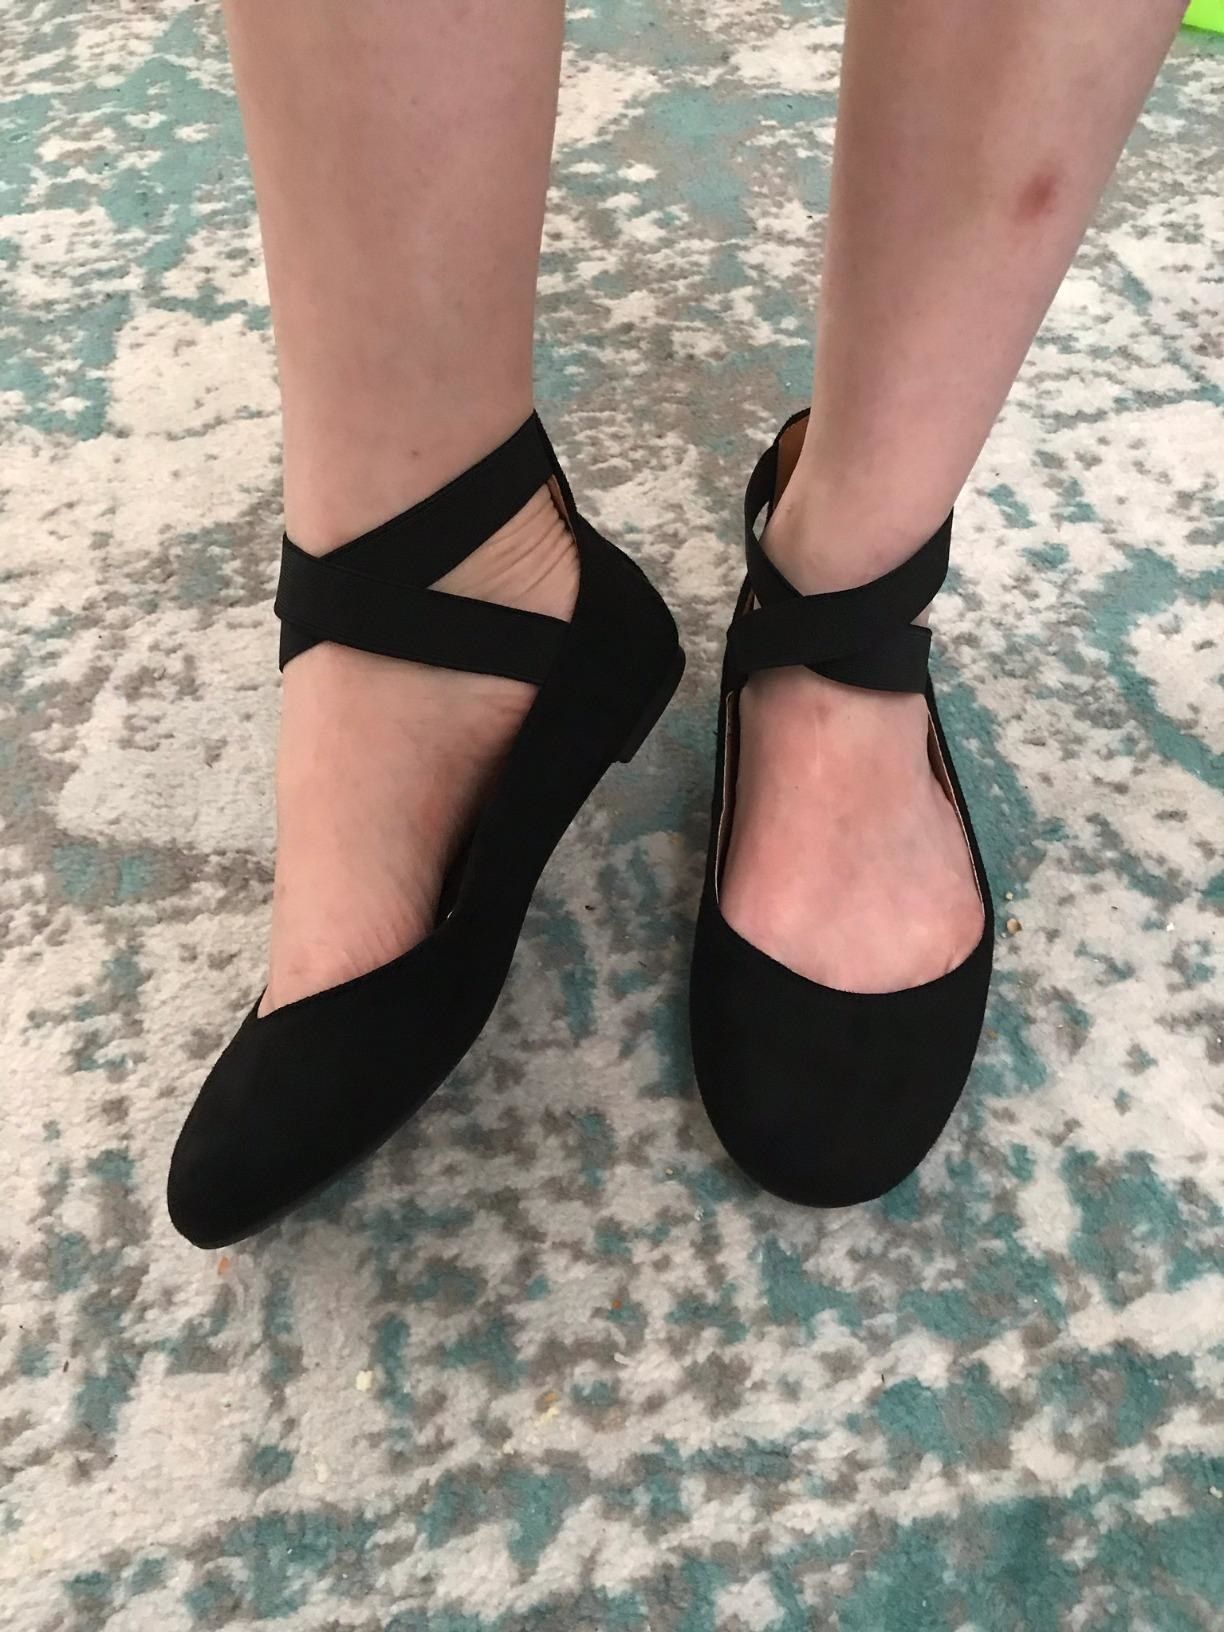 How to Style Ankle Strap Flats: Top 13 Ladylike & Casual Outfit Ideas